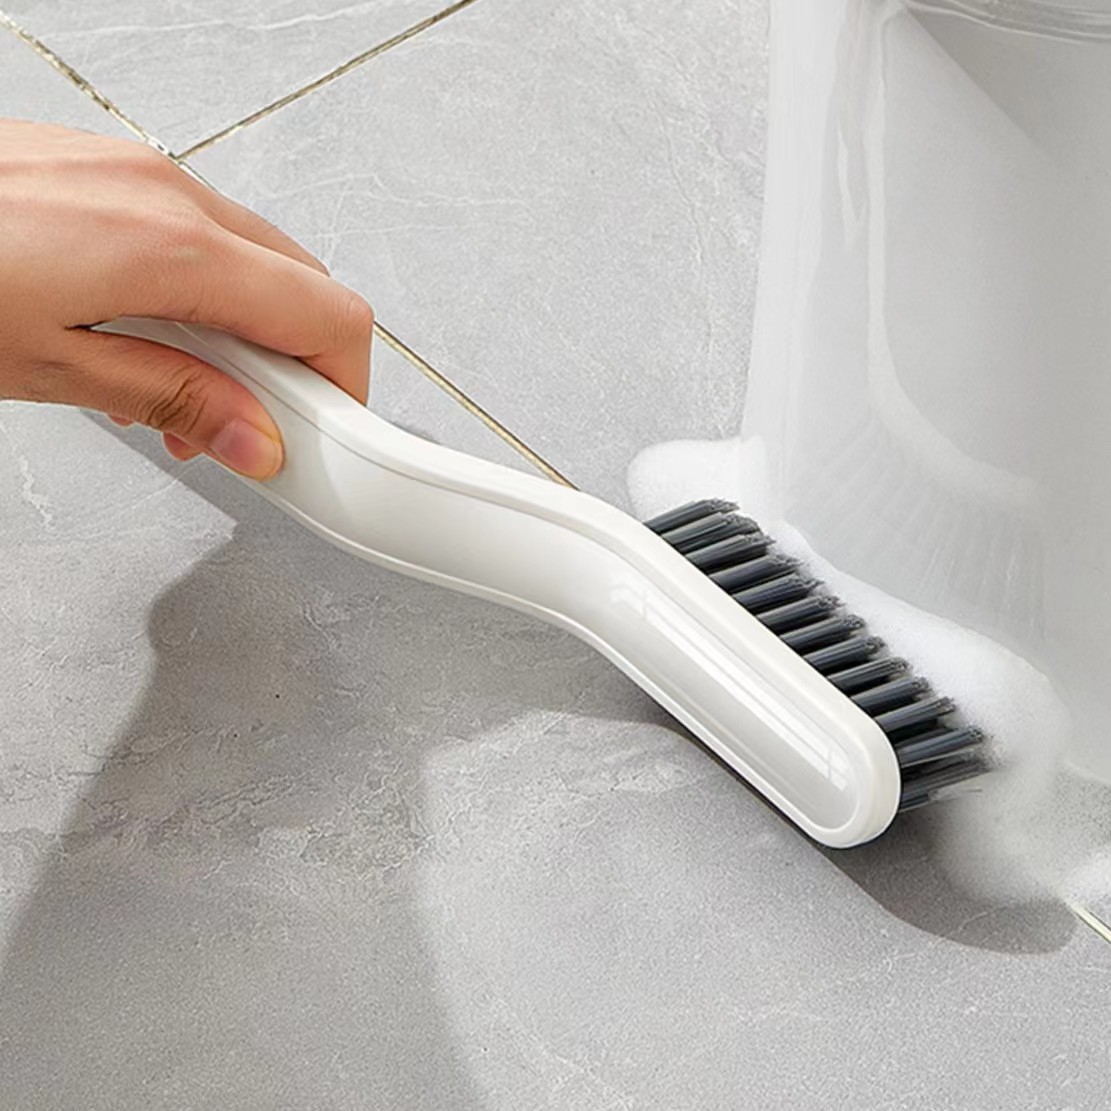 ✓ Buy Online Cleaning Brush Set - Deep Clean Tiles, Grout